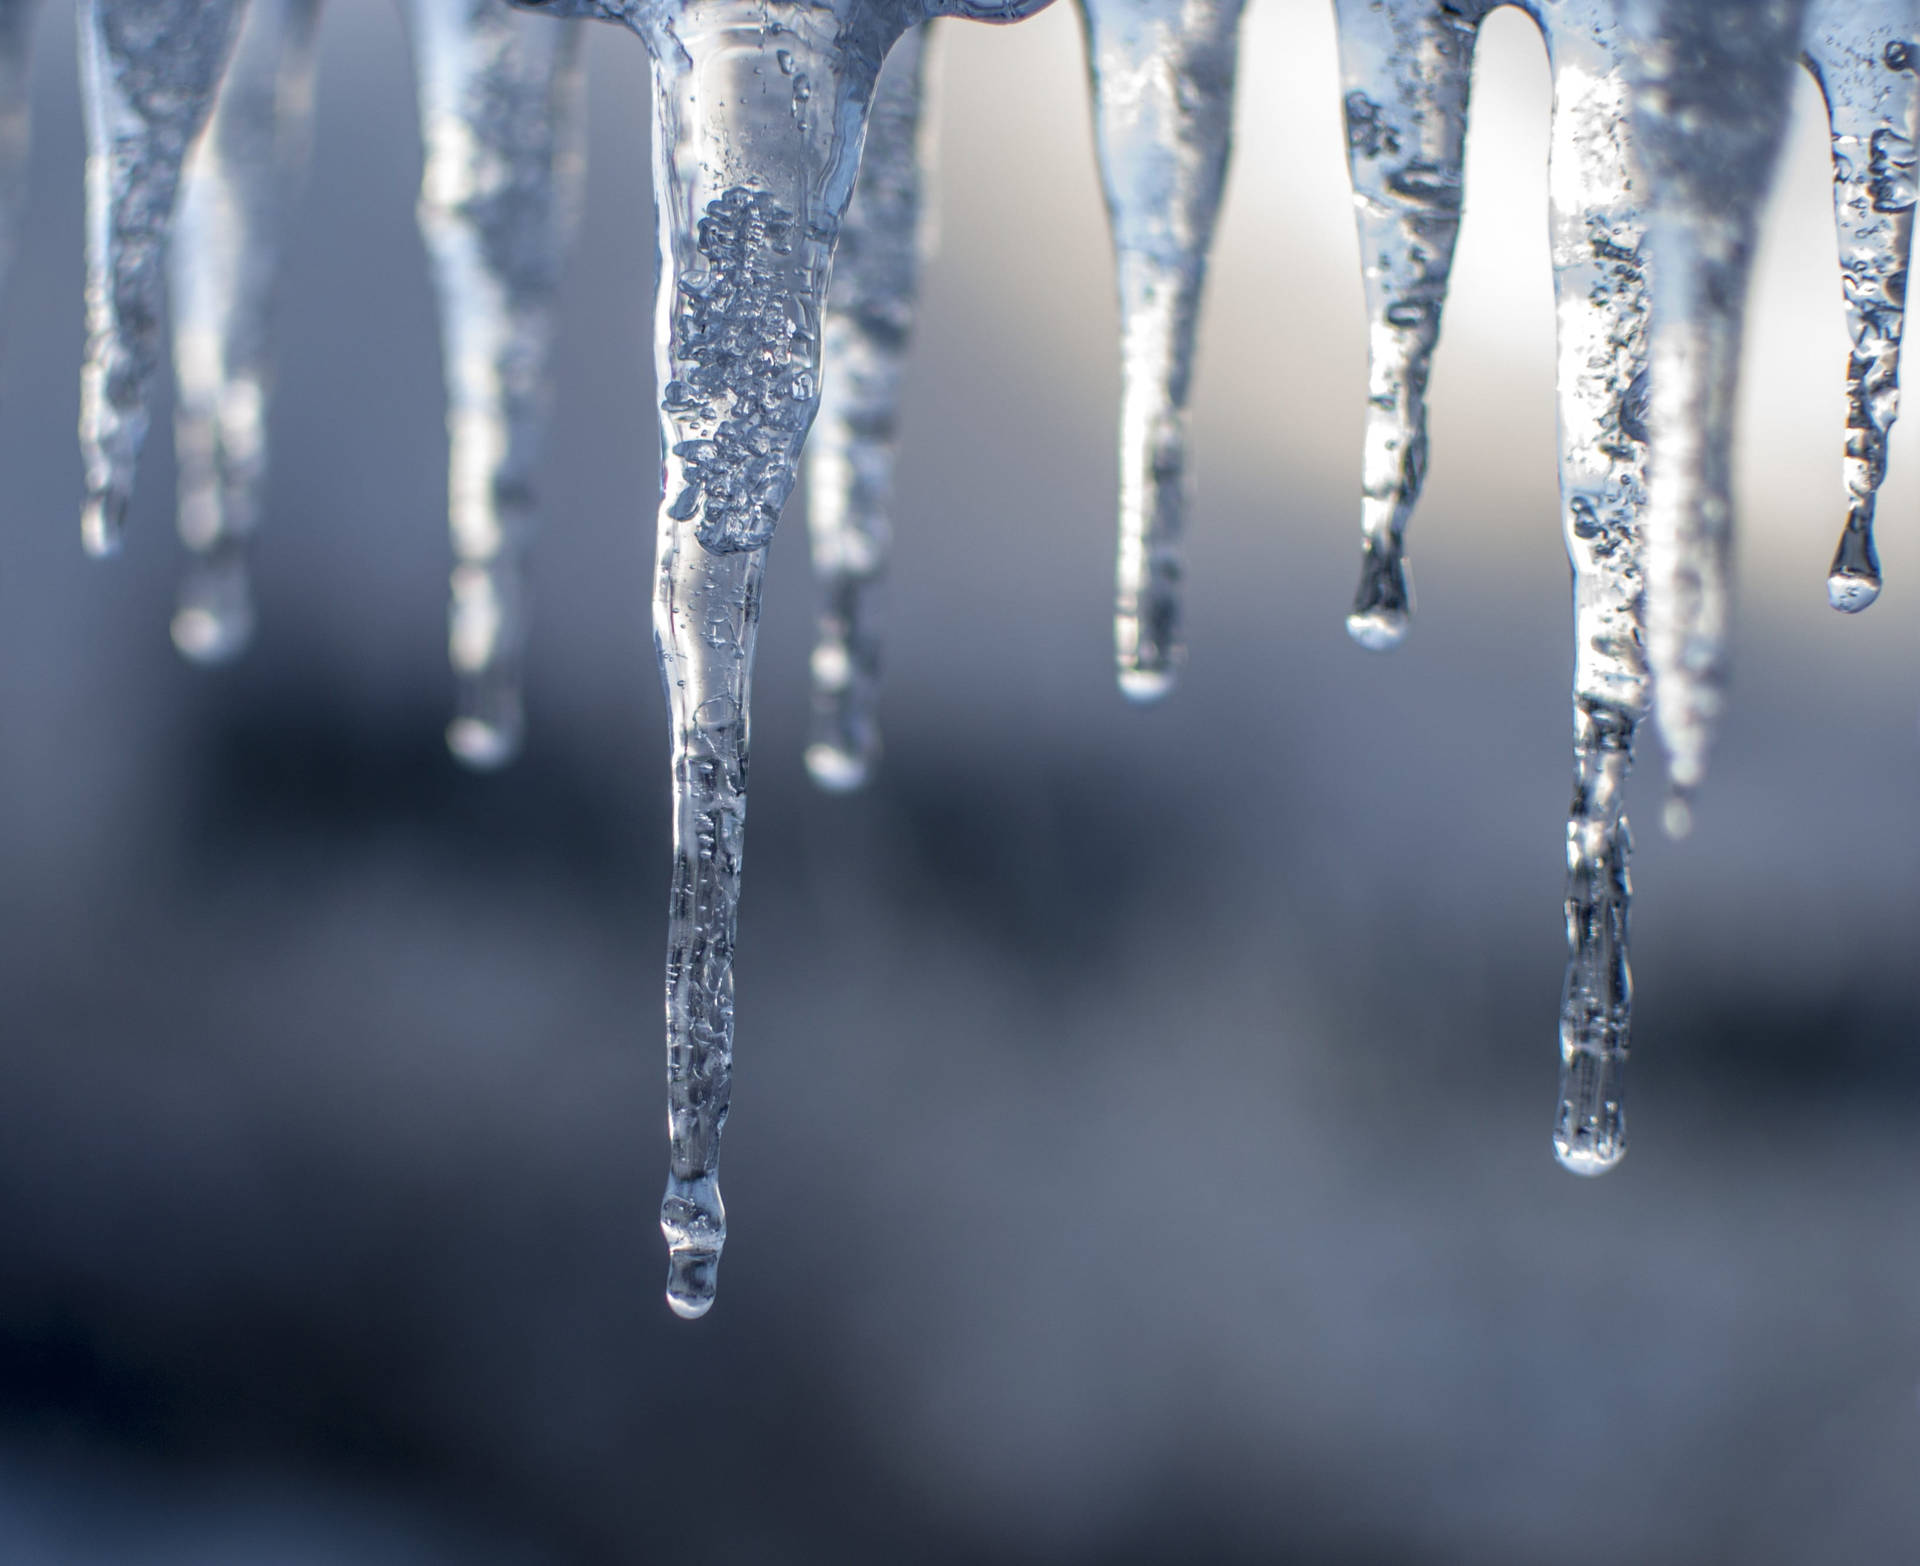 Low Temperature Icicles Background